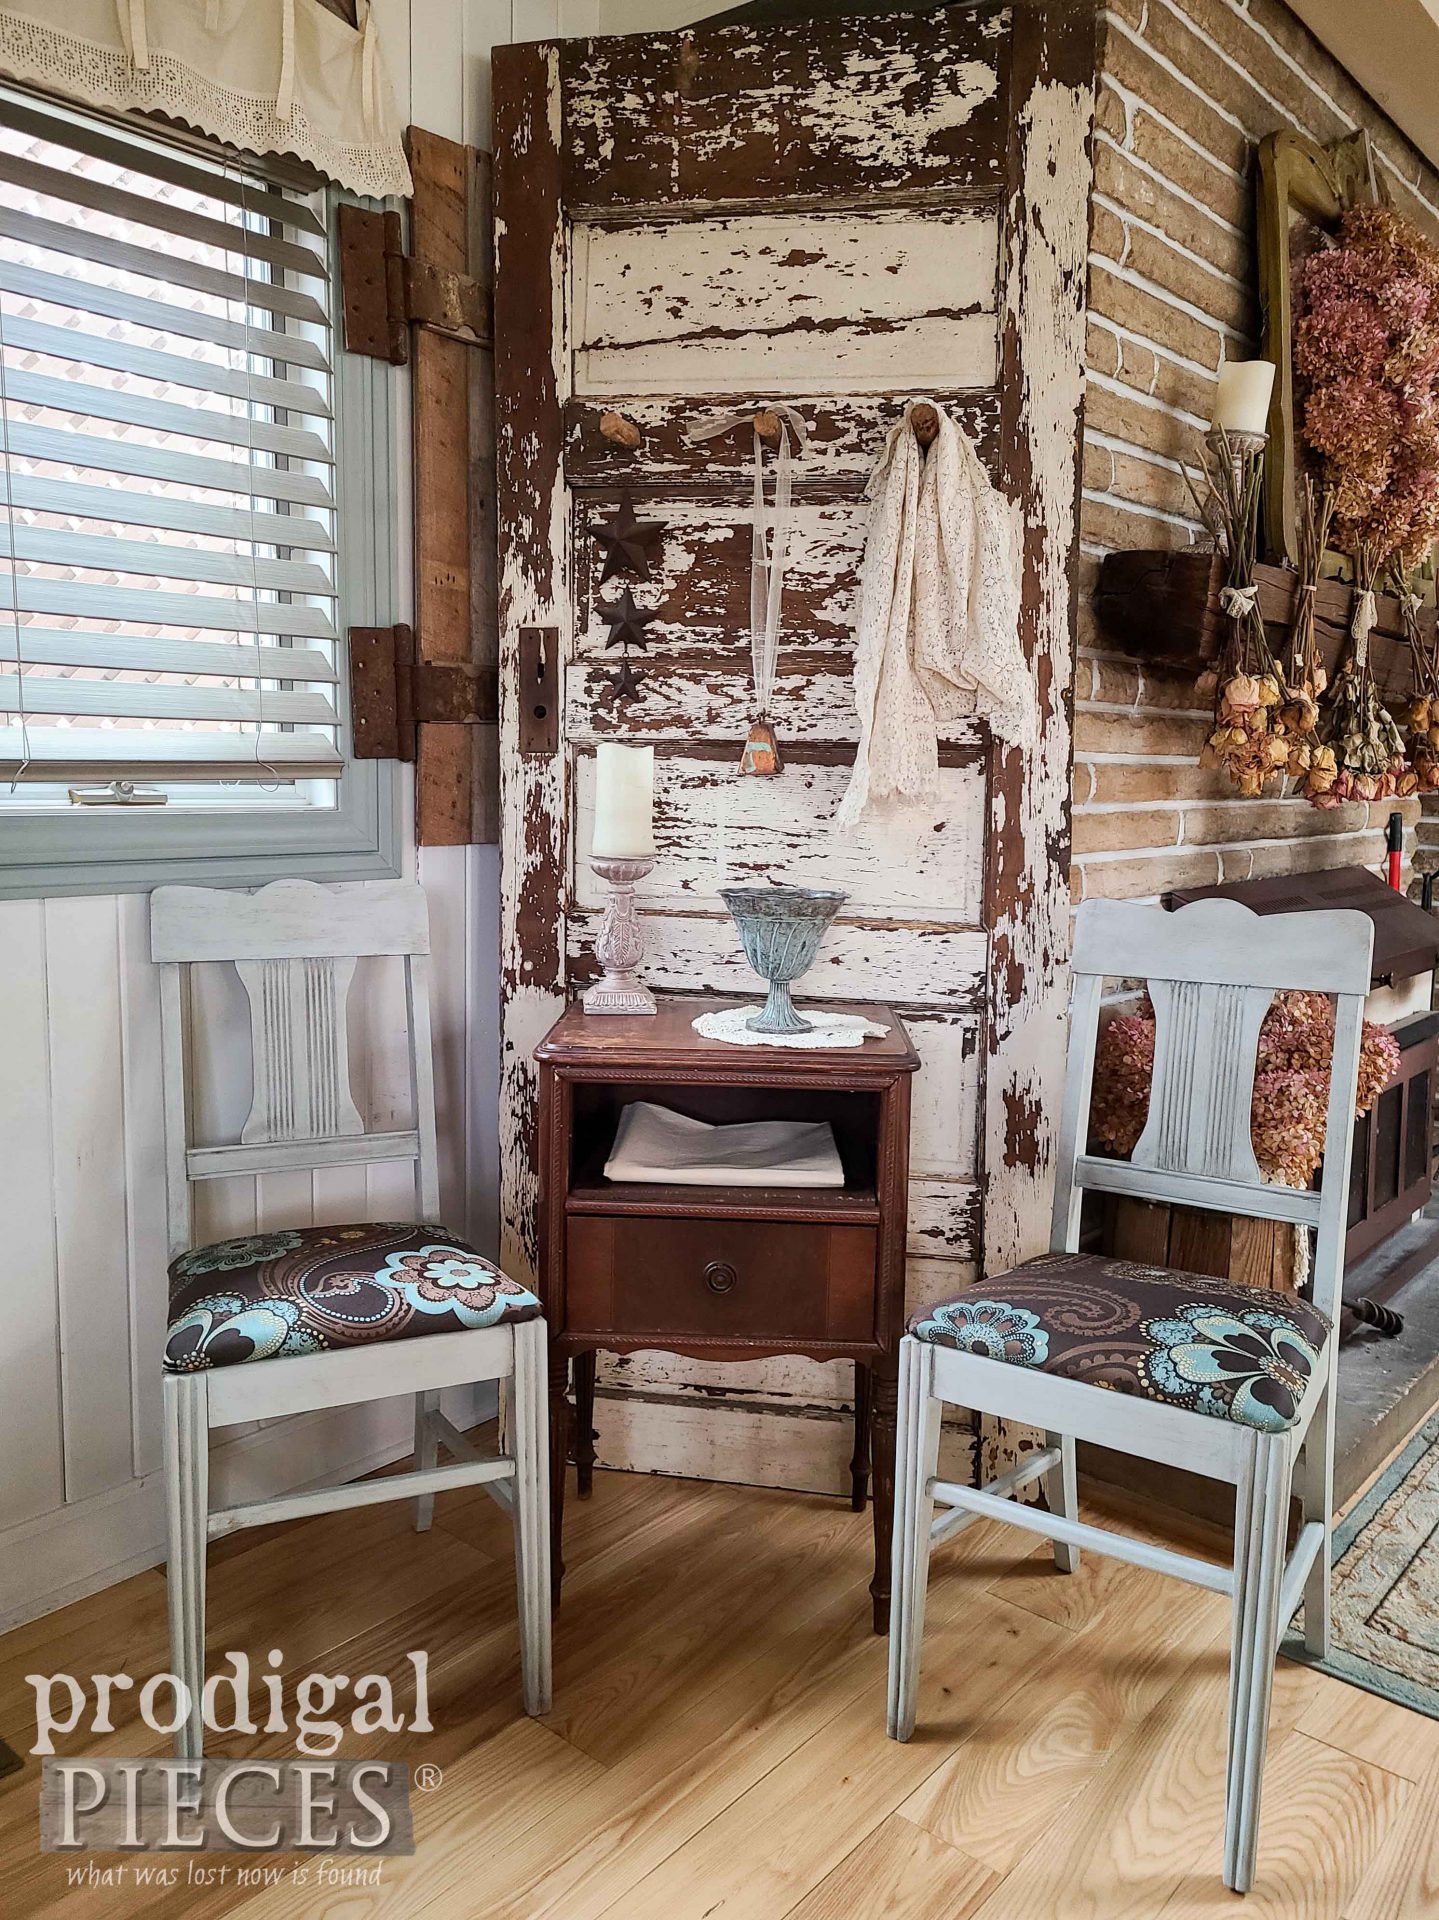 DIY Updated Vintage Chairs with Upholstery by Larissa of Prodigal Pieces | prodigalpieces.com #prodigalpieces #vintage #furniture